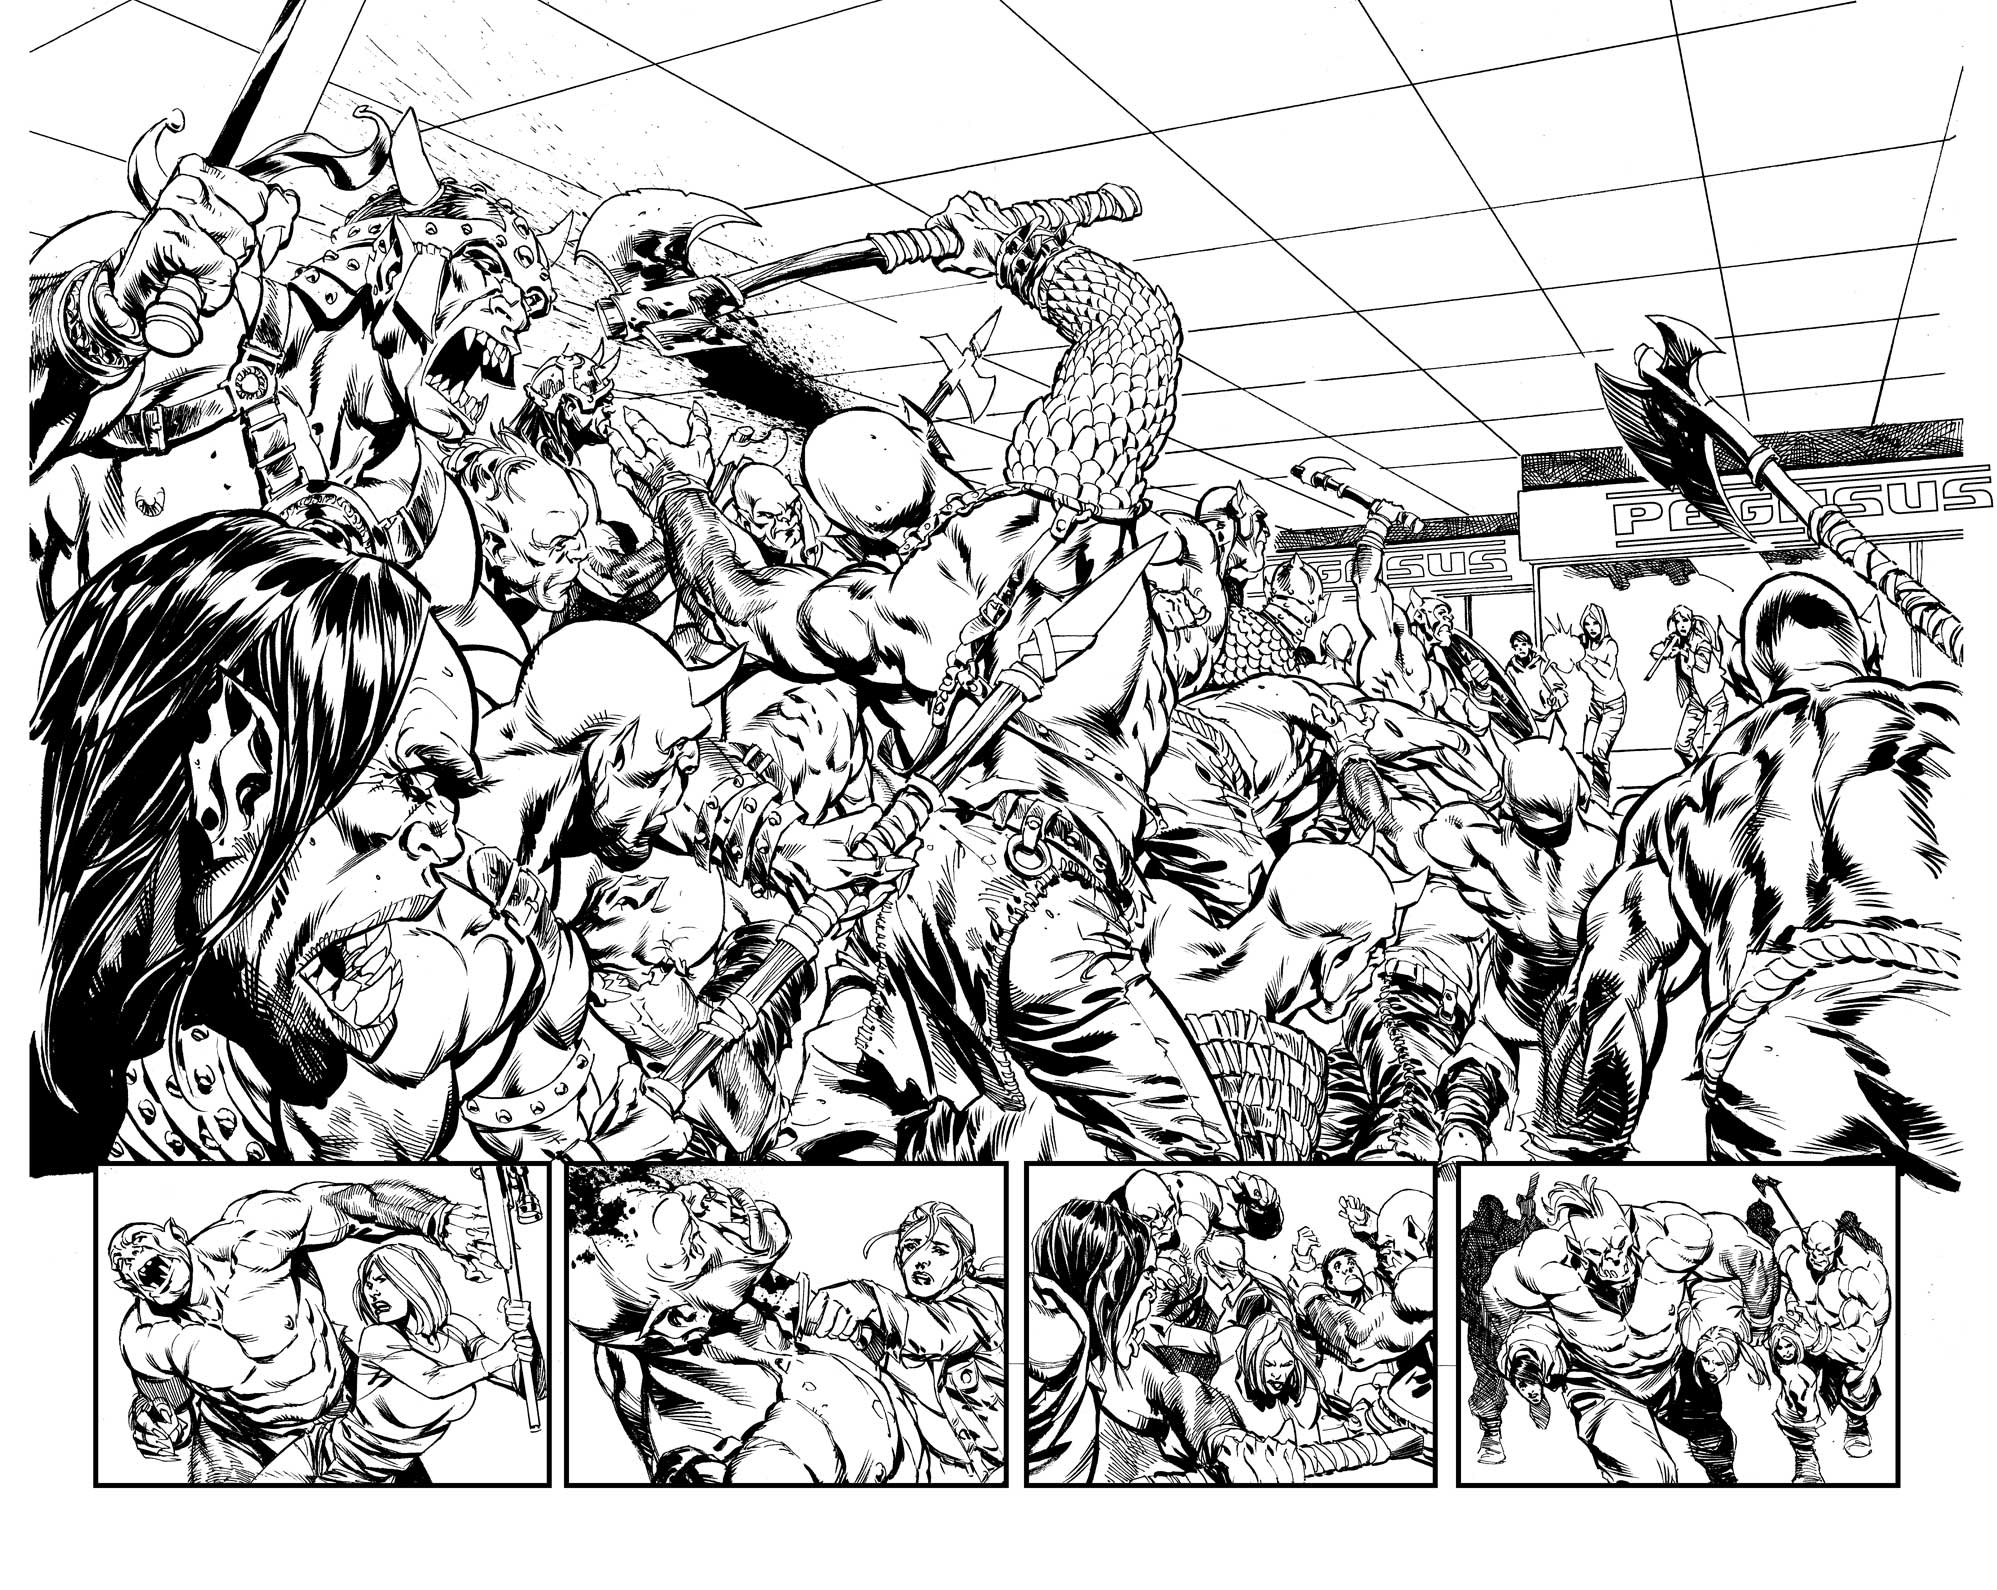 King's Road # Splash Pages by Staz Johnson